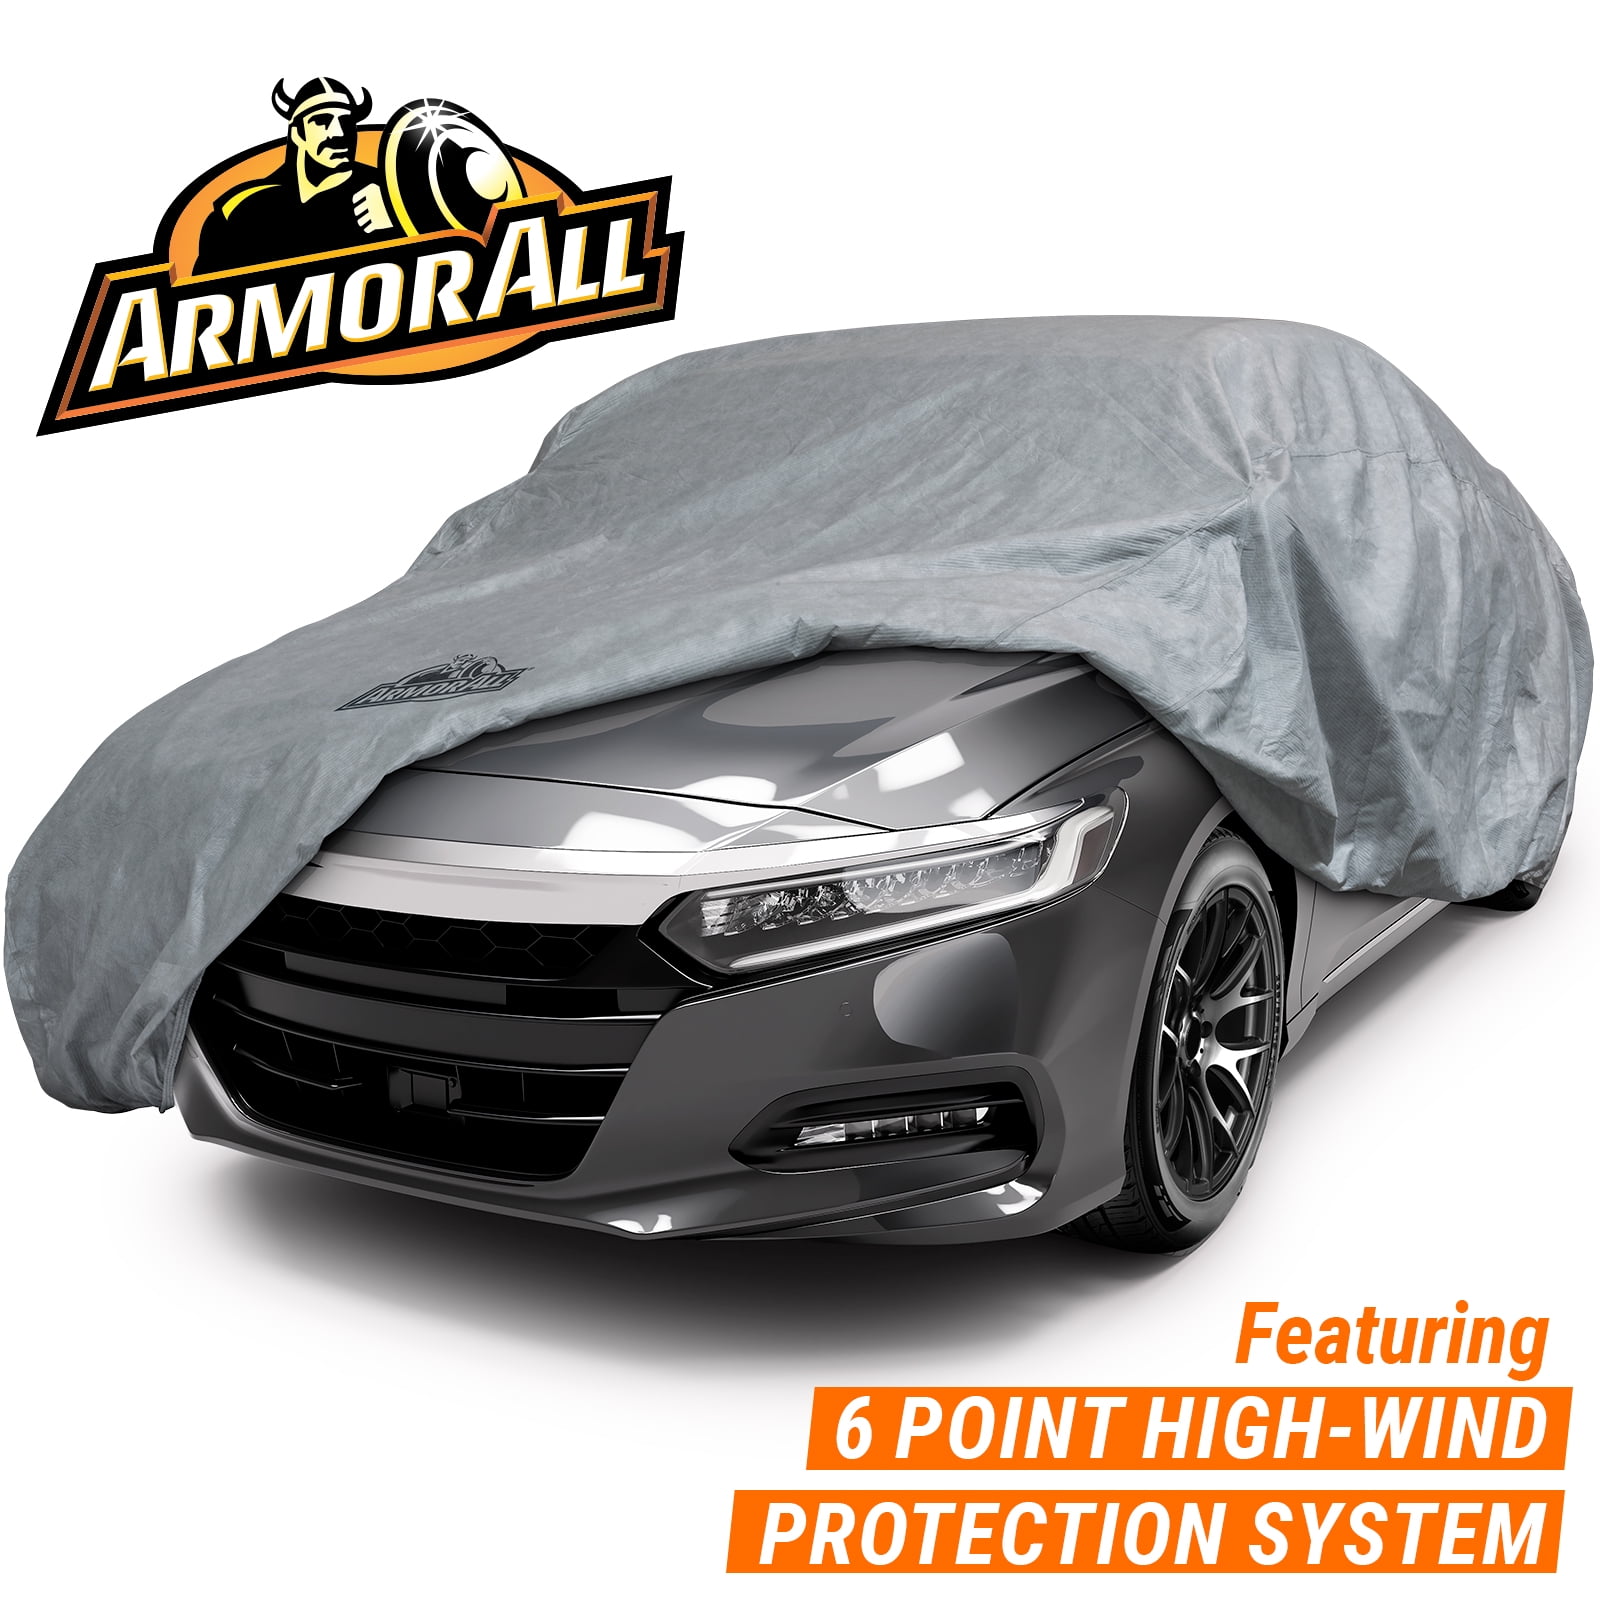 Armor All SUV Cover, Heavy Duty All Weather Protection, Fits SUVs Length up  to 186\